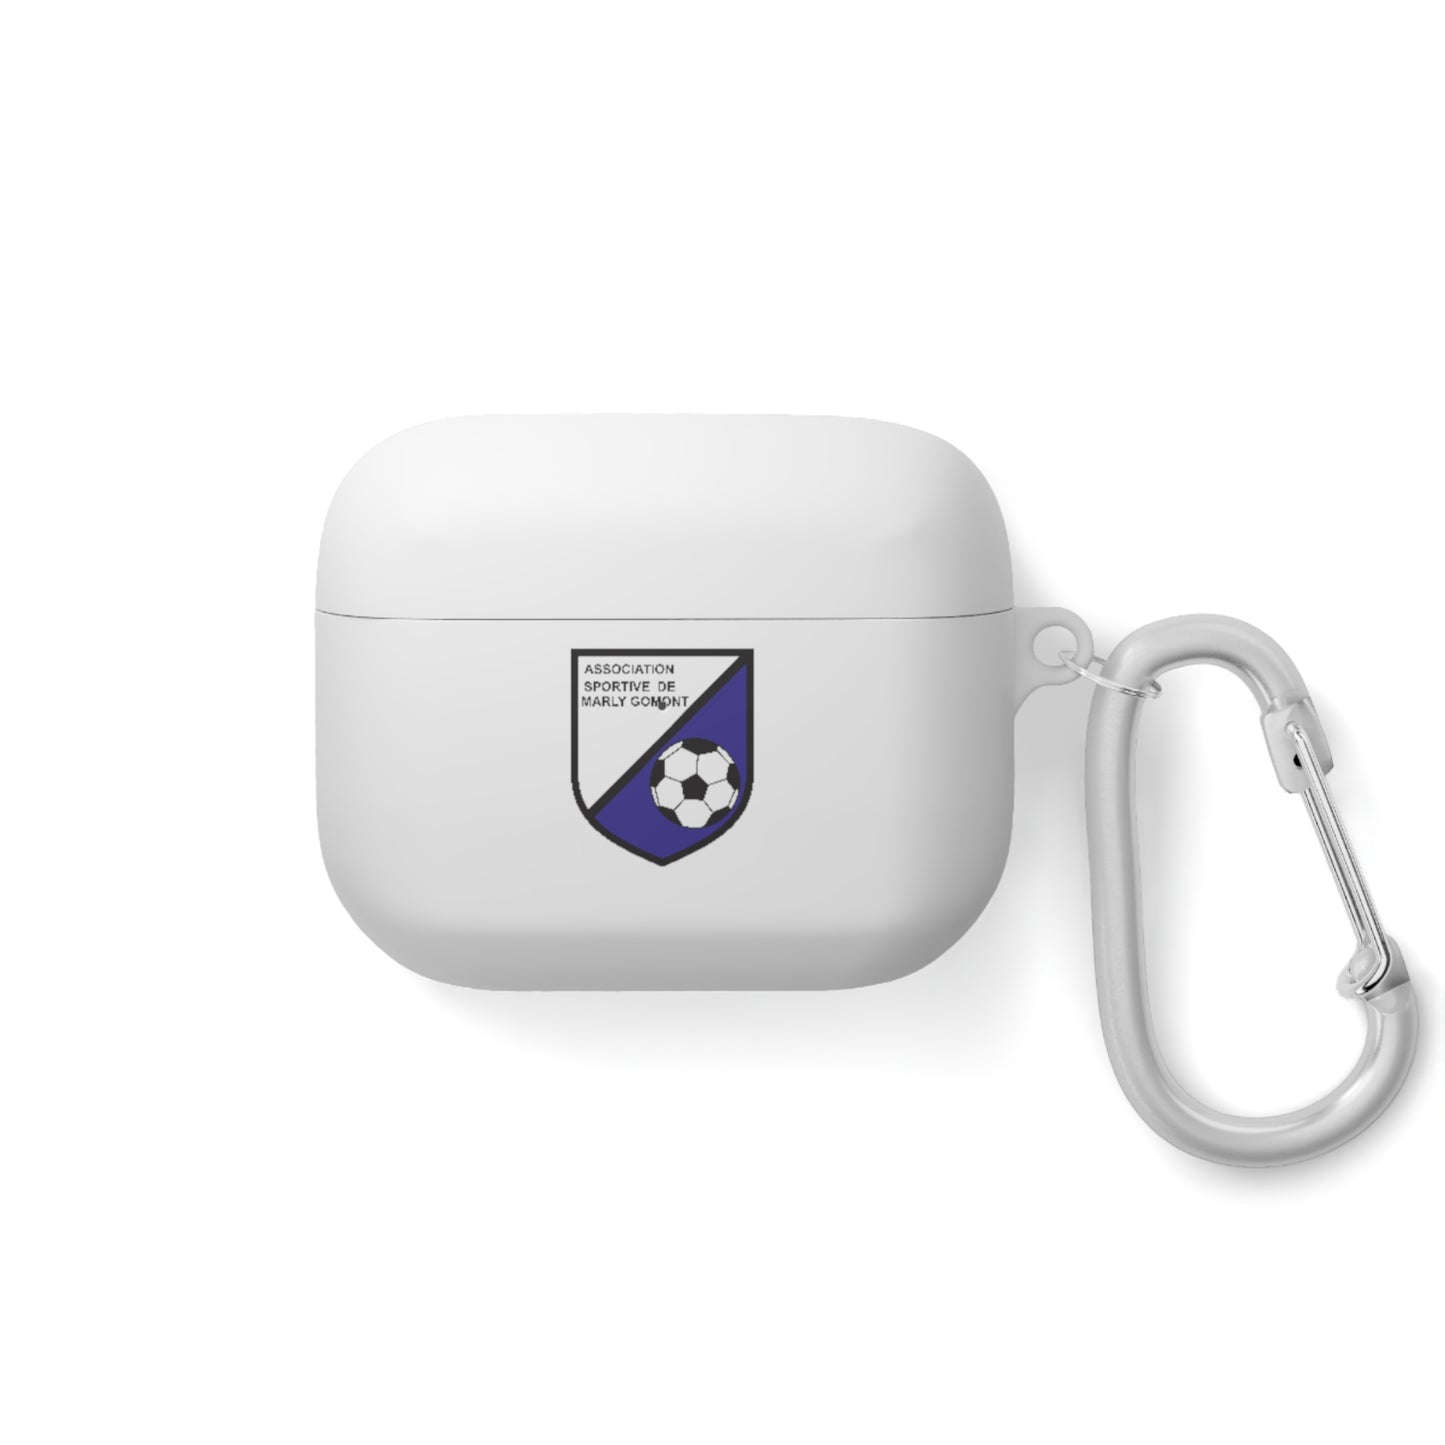 Association Sportive de Mary Gomont AirPods and AirPods Pro Case Cover